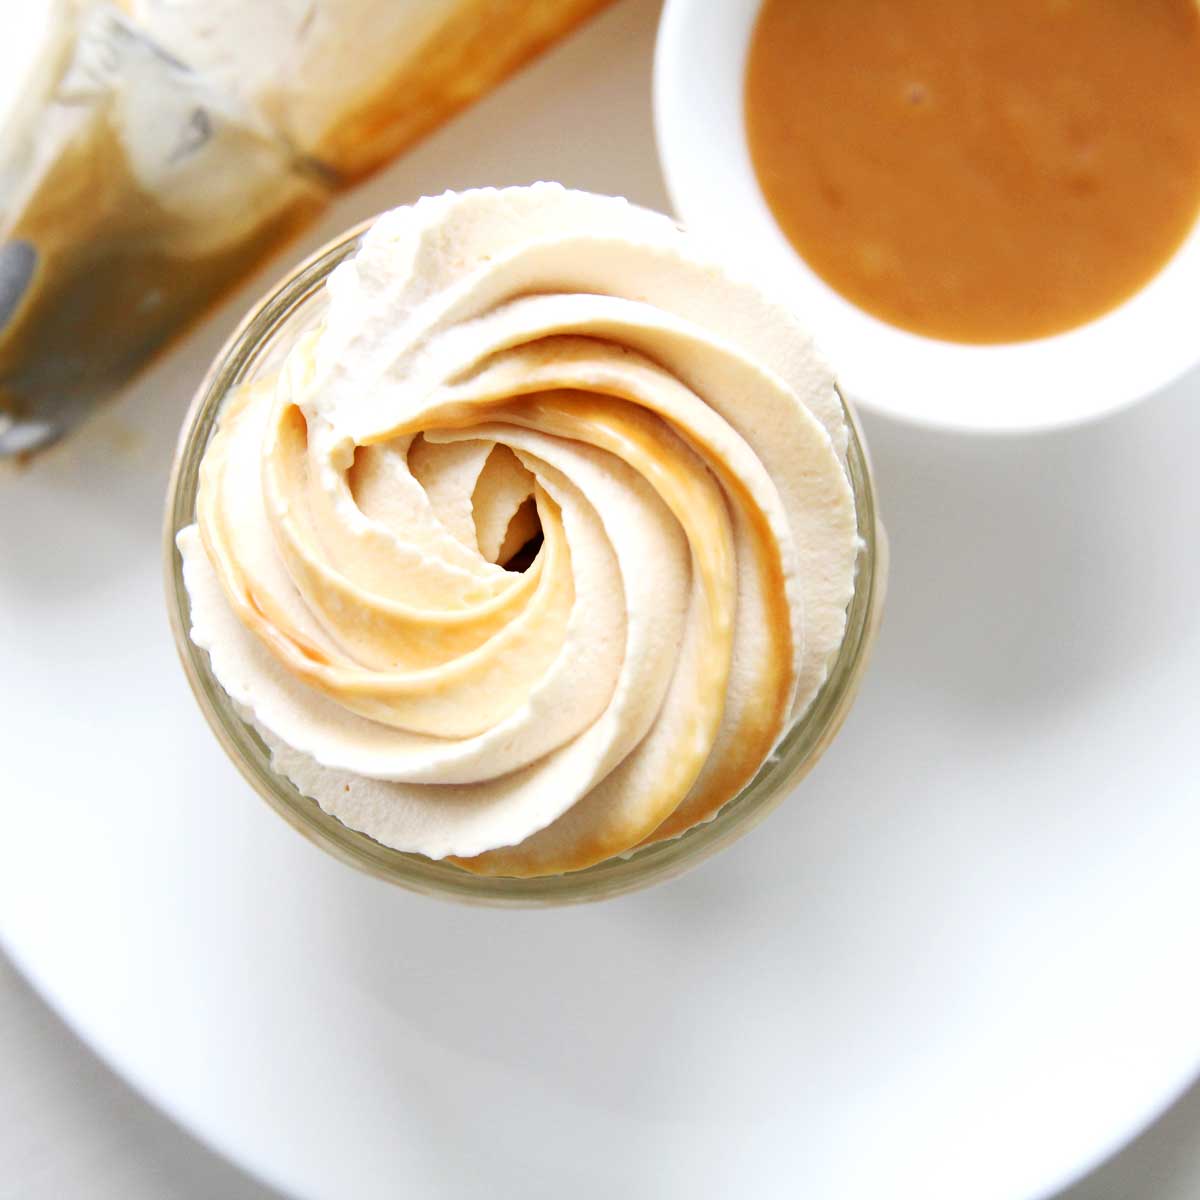 Swirled Caramel Whipped Cream Recipe Perfect for Coffee, Cakes and More - Strawberry Whipped Cream